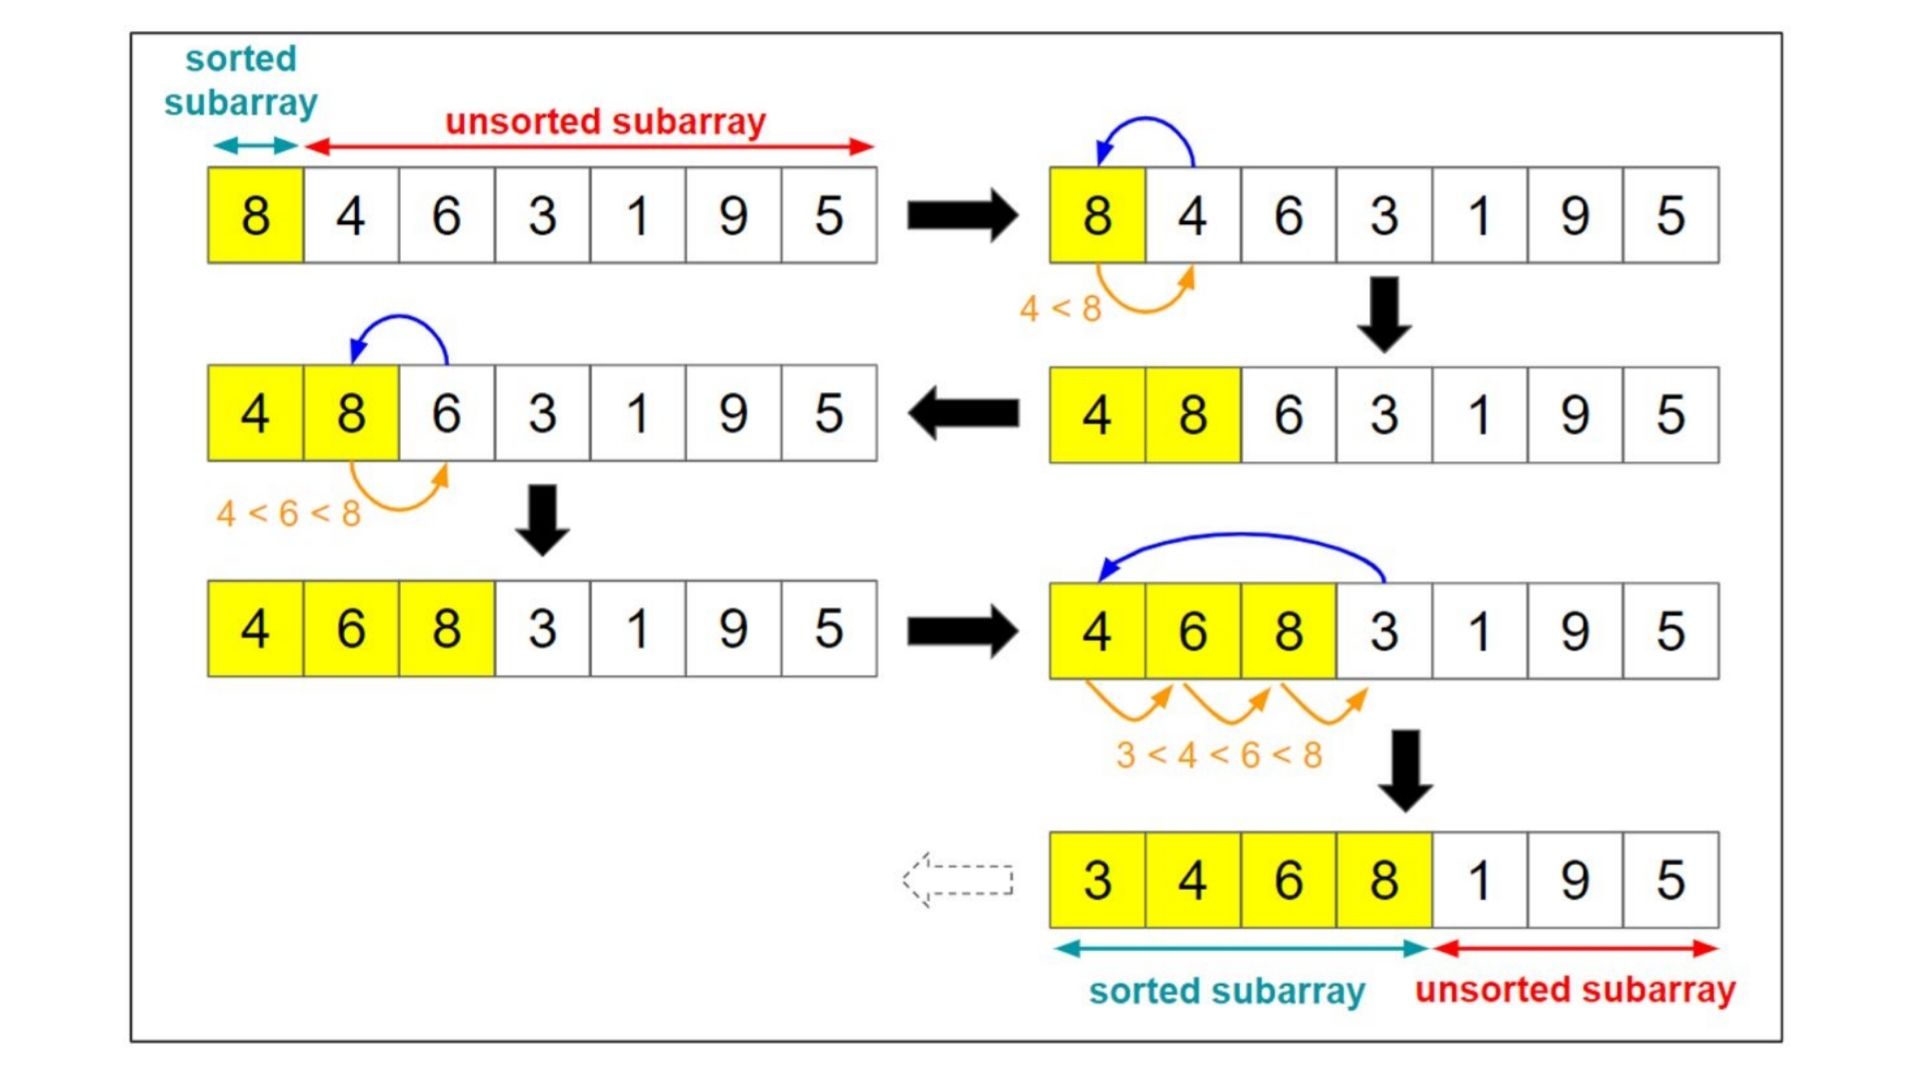 How to perform Insertion Sort in Python?